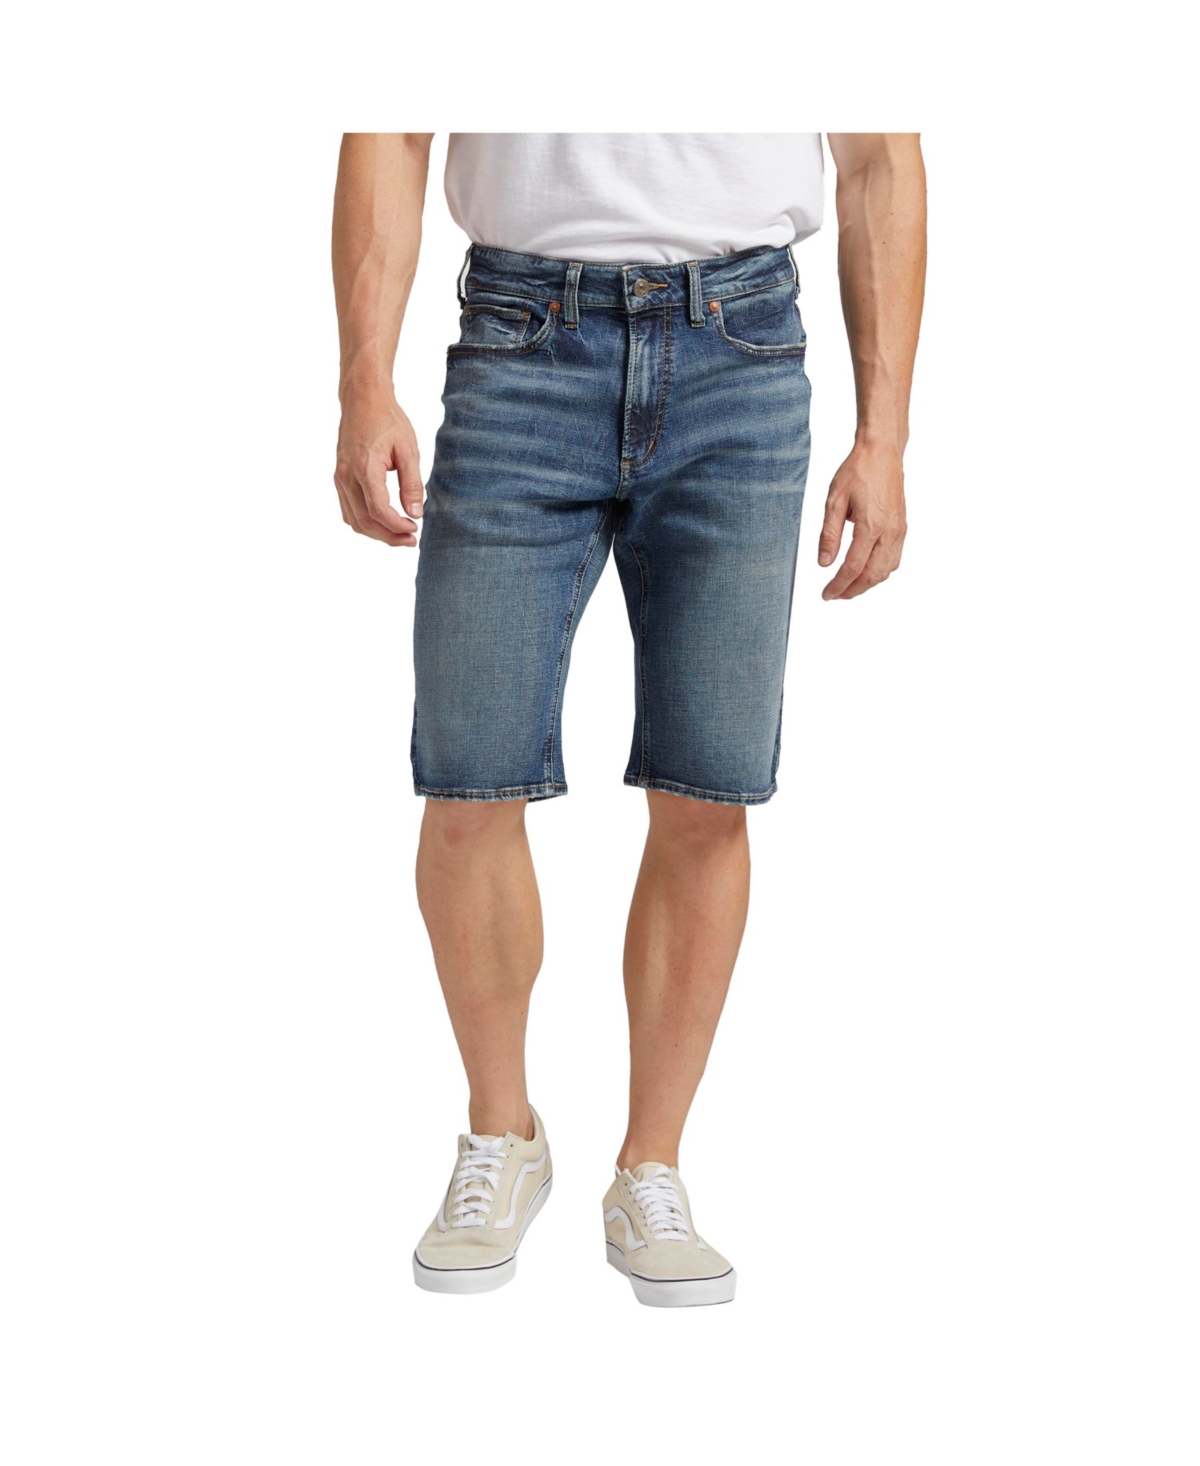 Silver Jeans Co. Men's Gordie Relaxed Fit 13" Denim Shorts In Indigo